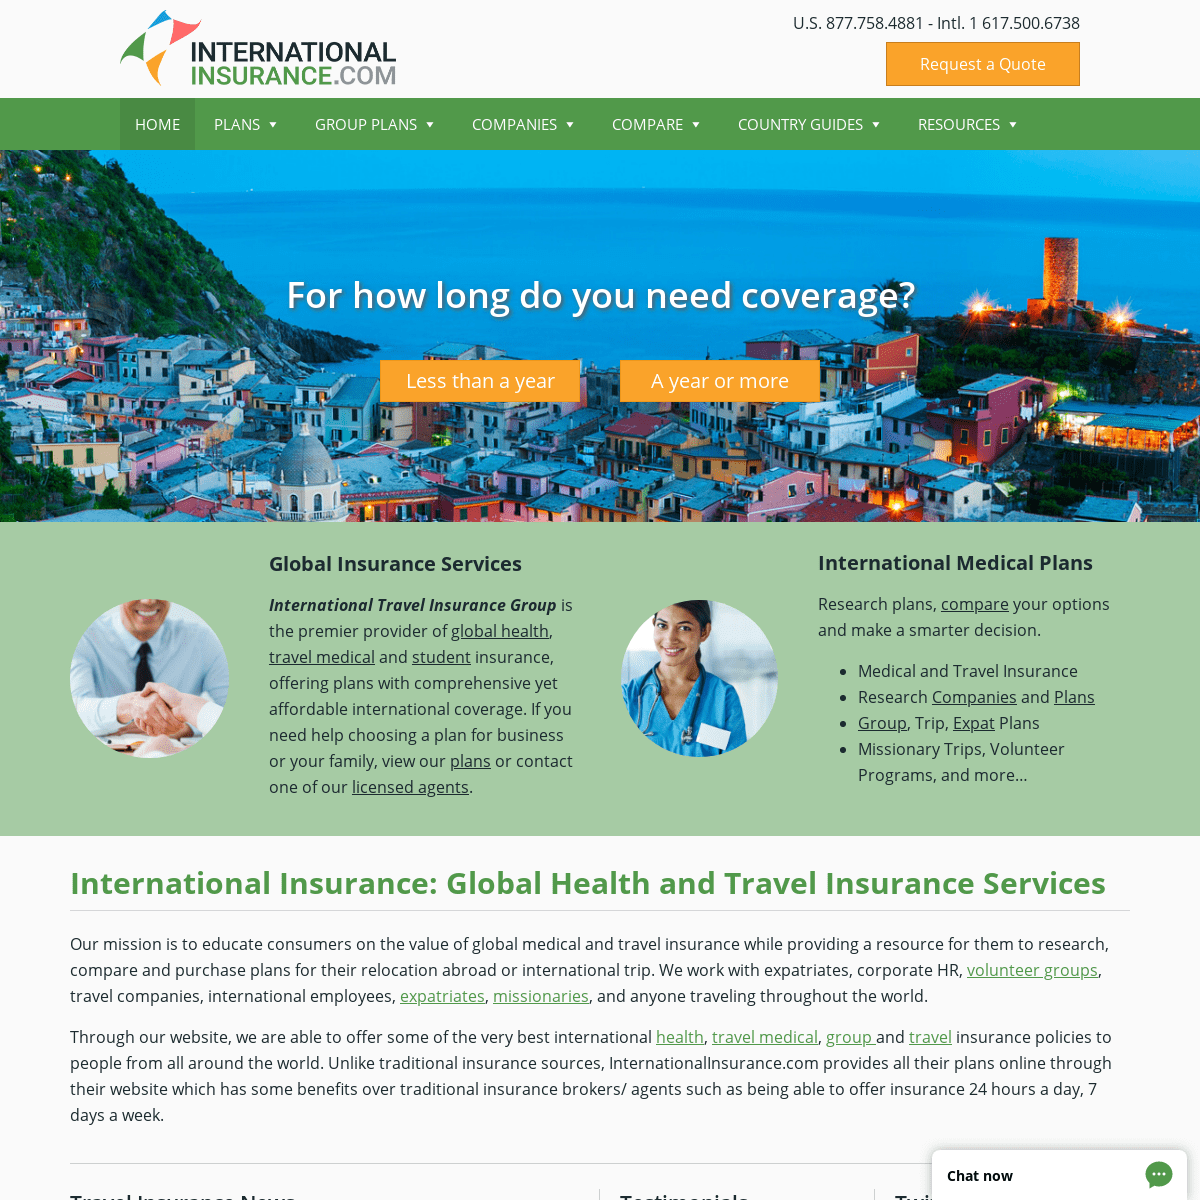 International Travel Insurance Group - Global Health and Medical Plans!